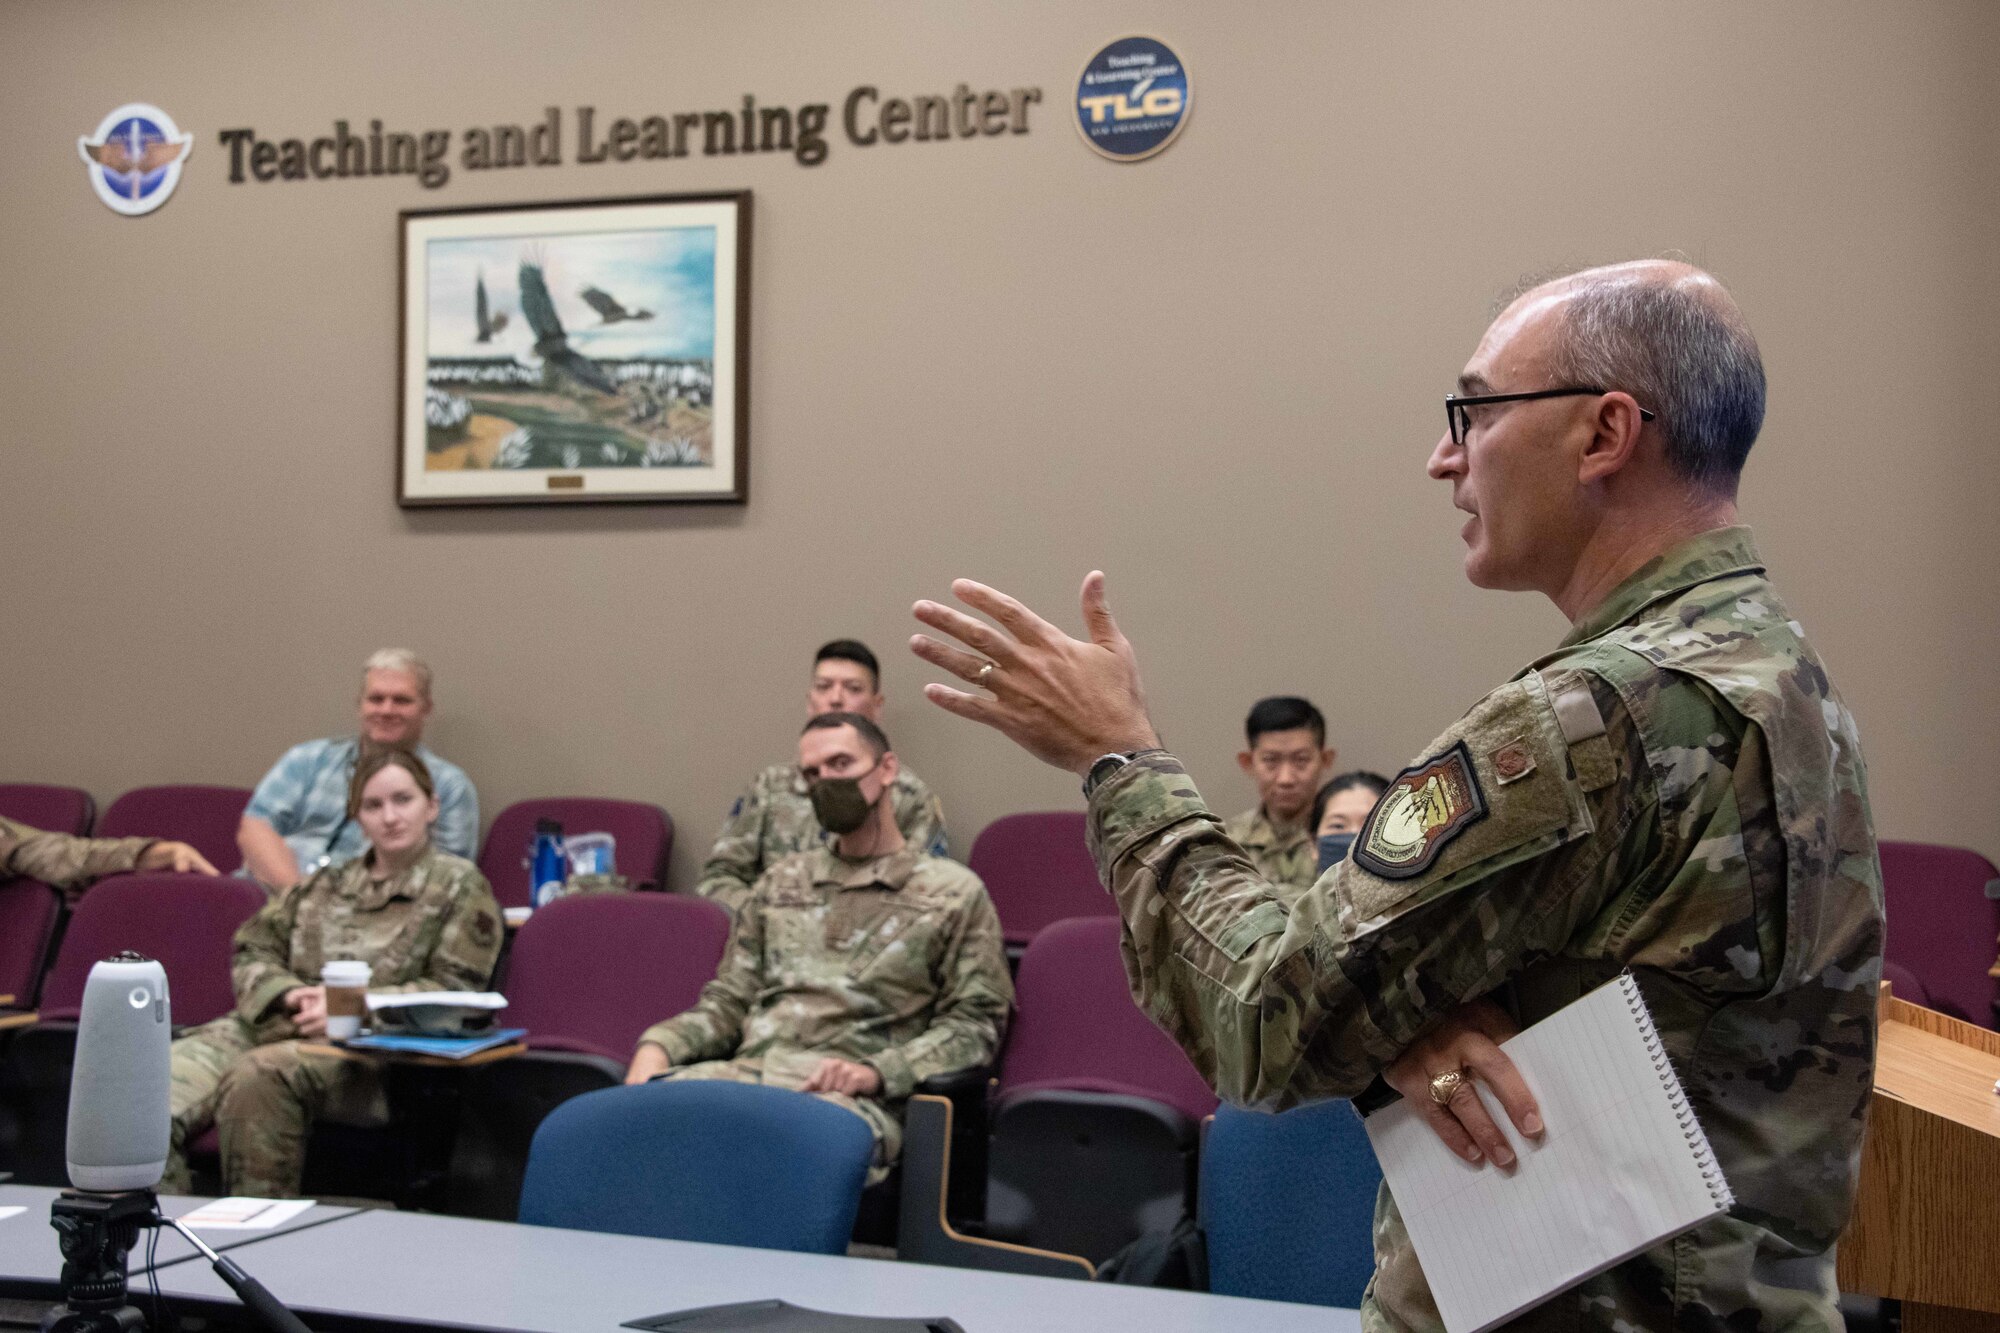 Col. Kevin Parker, Associate Dean, Air Force Cyber College, leads U.S. Air Force and U.S. Space Force Language Enabled Airmen Program (LEAP) scholars attending the Cyber Language Intensive Training Event (LITE) through a role playing scenario involving fictitious air operations in a forward theater that are potentially impacted by cybersecurity issues, Jul.22, 2021. Cyber LITE is a Strategic Power Competition course co-sponsored by the Air Force Culture and Language Center and Air Force Cyber College for advanced language proficiency LEAP scholars who have career-related ties to cyber operations and/or an academic background in cyber studies.